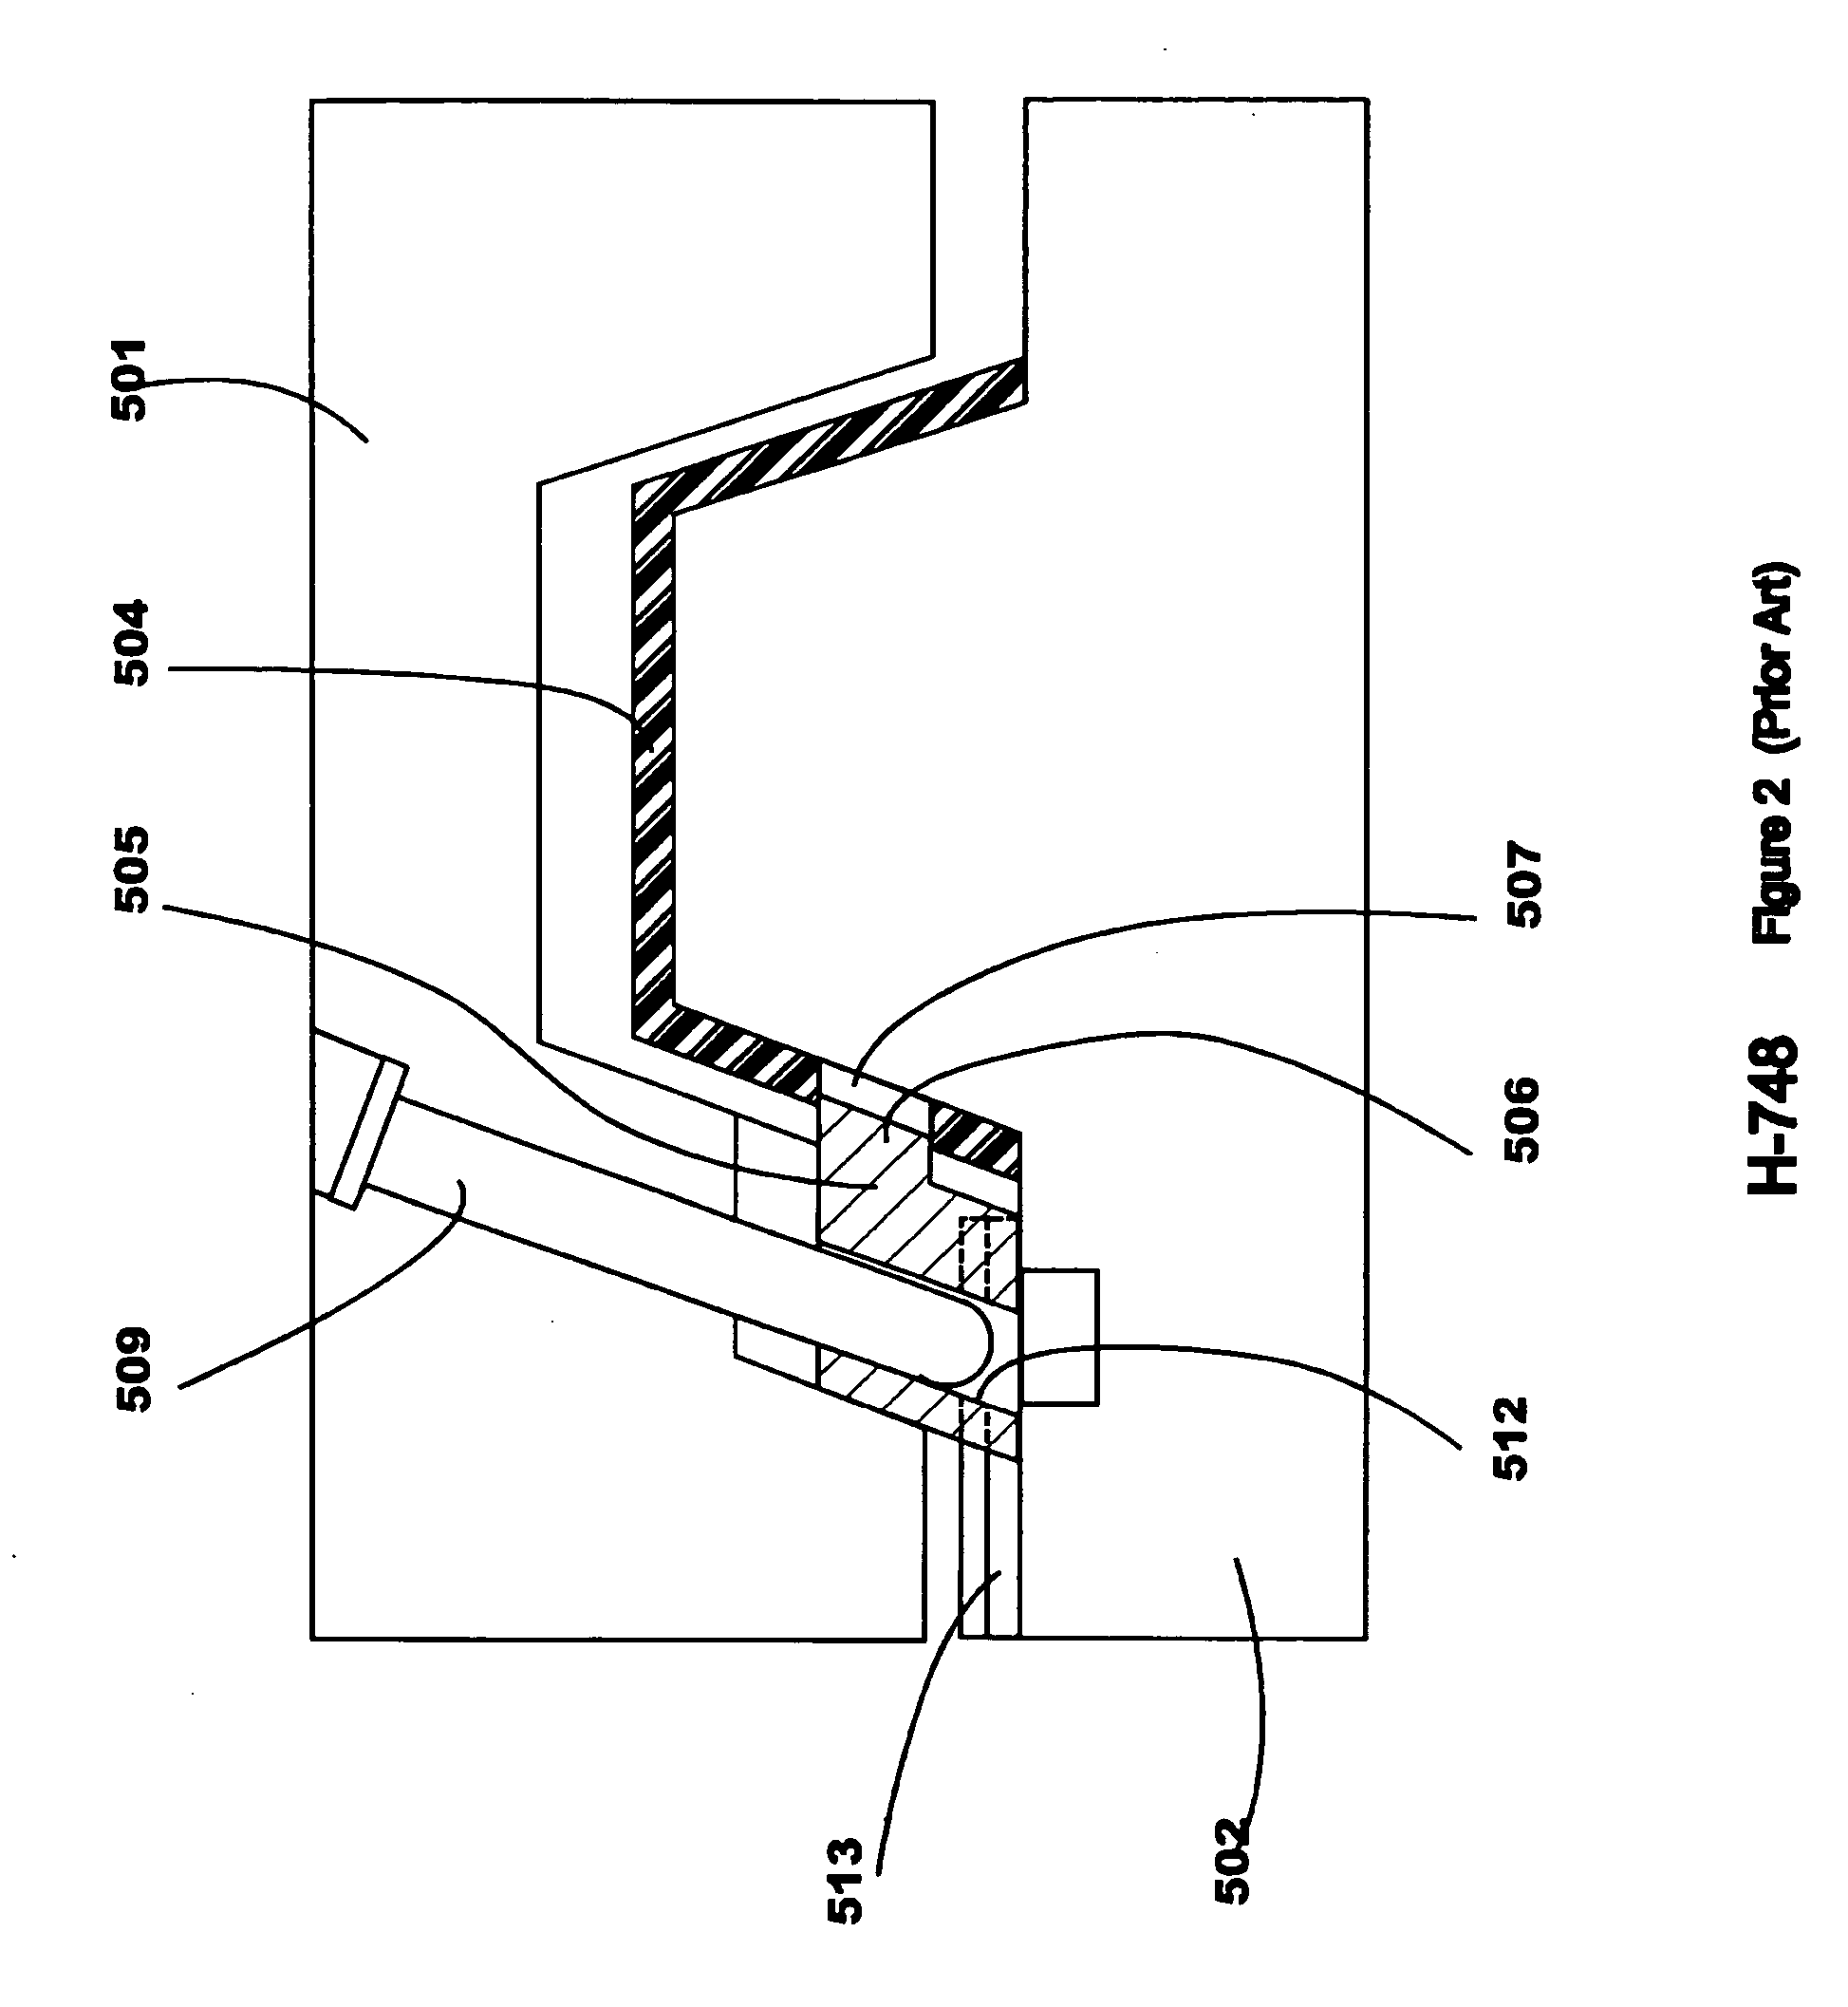 Method and apparatus for mold component locking using active material elements